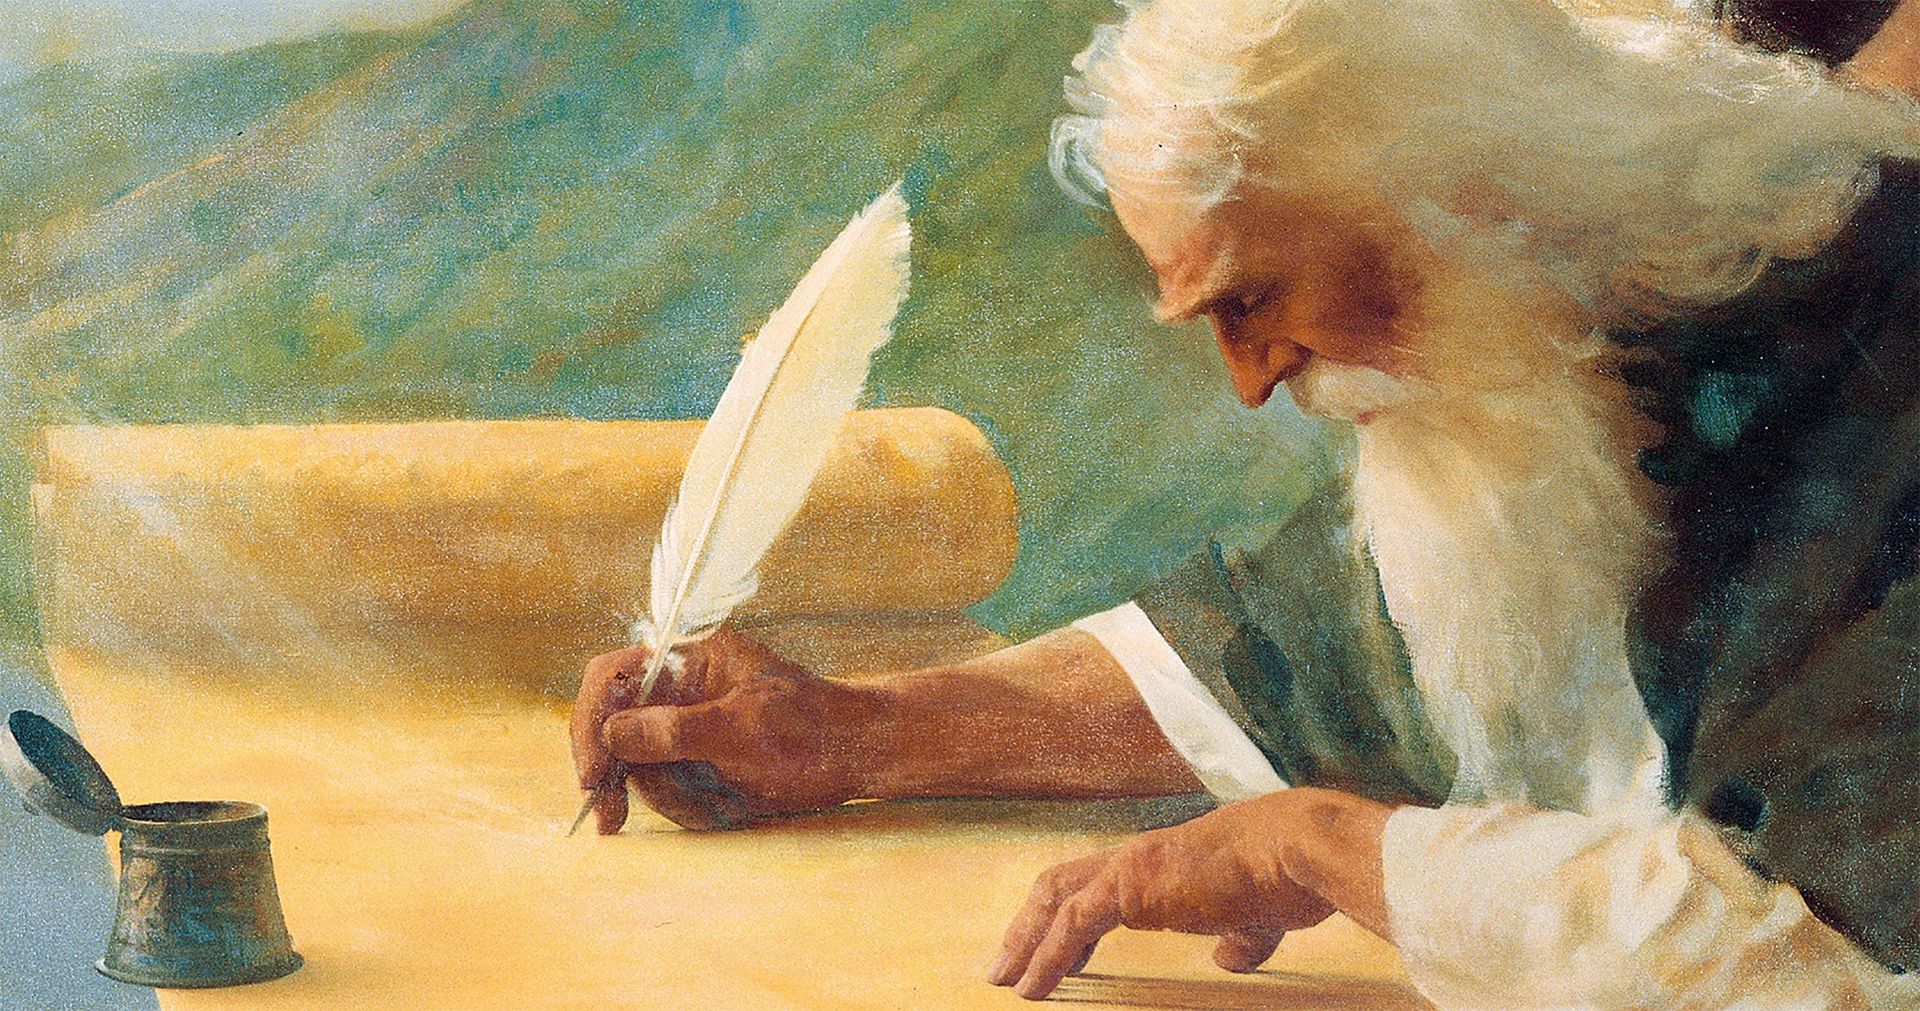 Painting of the prophet Isaiah writing on a large scroll.